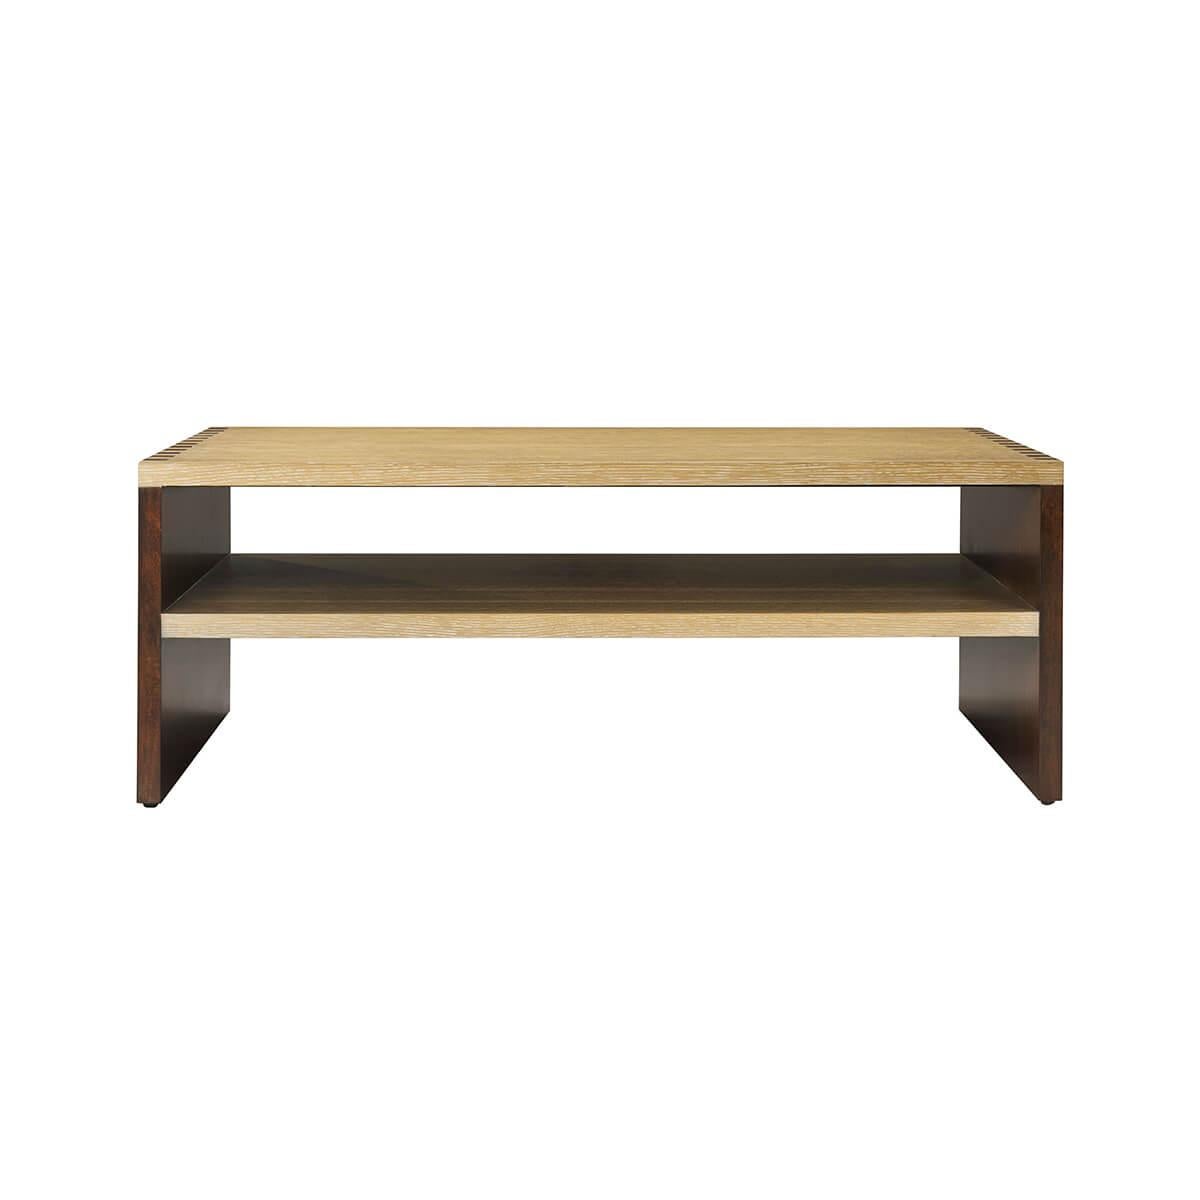 American Craftsman Modern Jointed Coffee Table For Sale